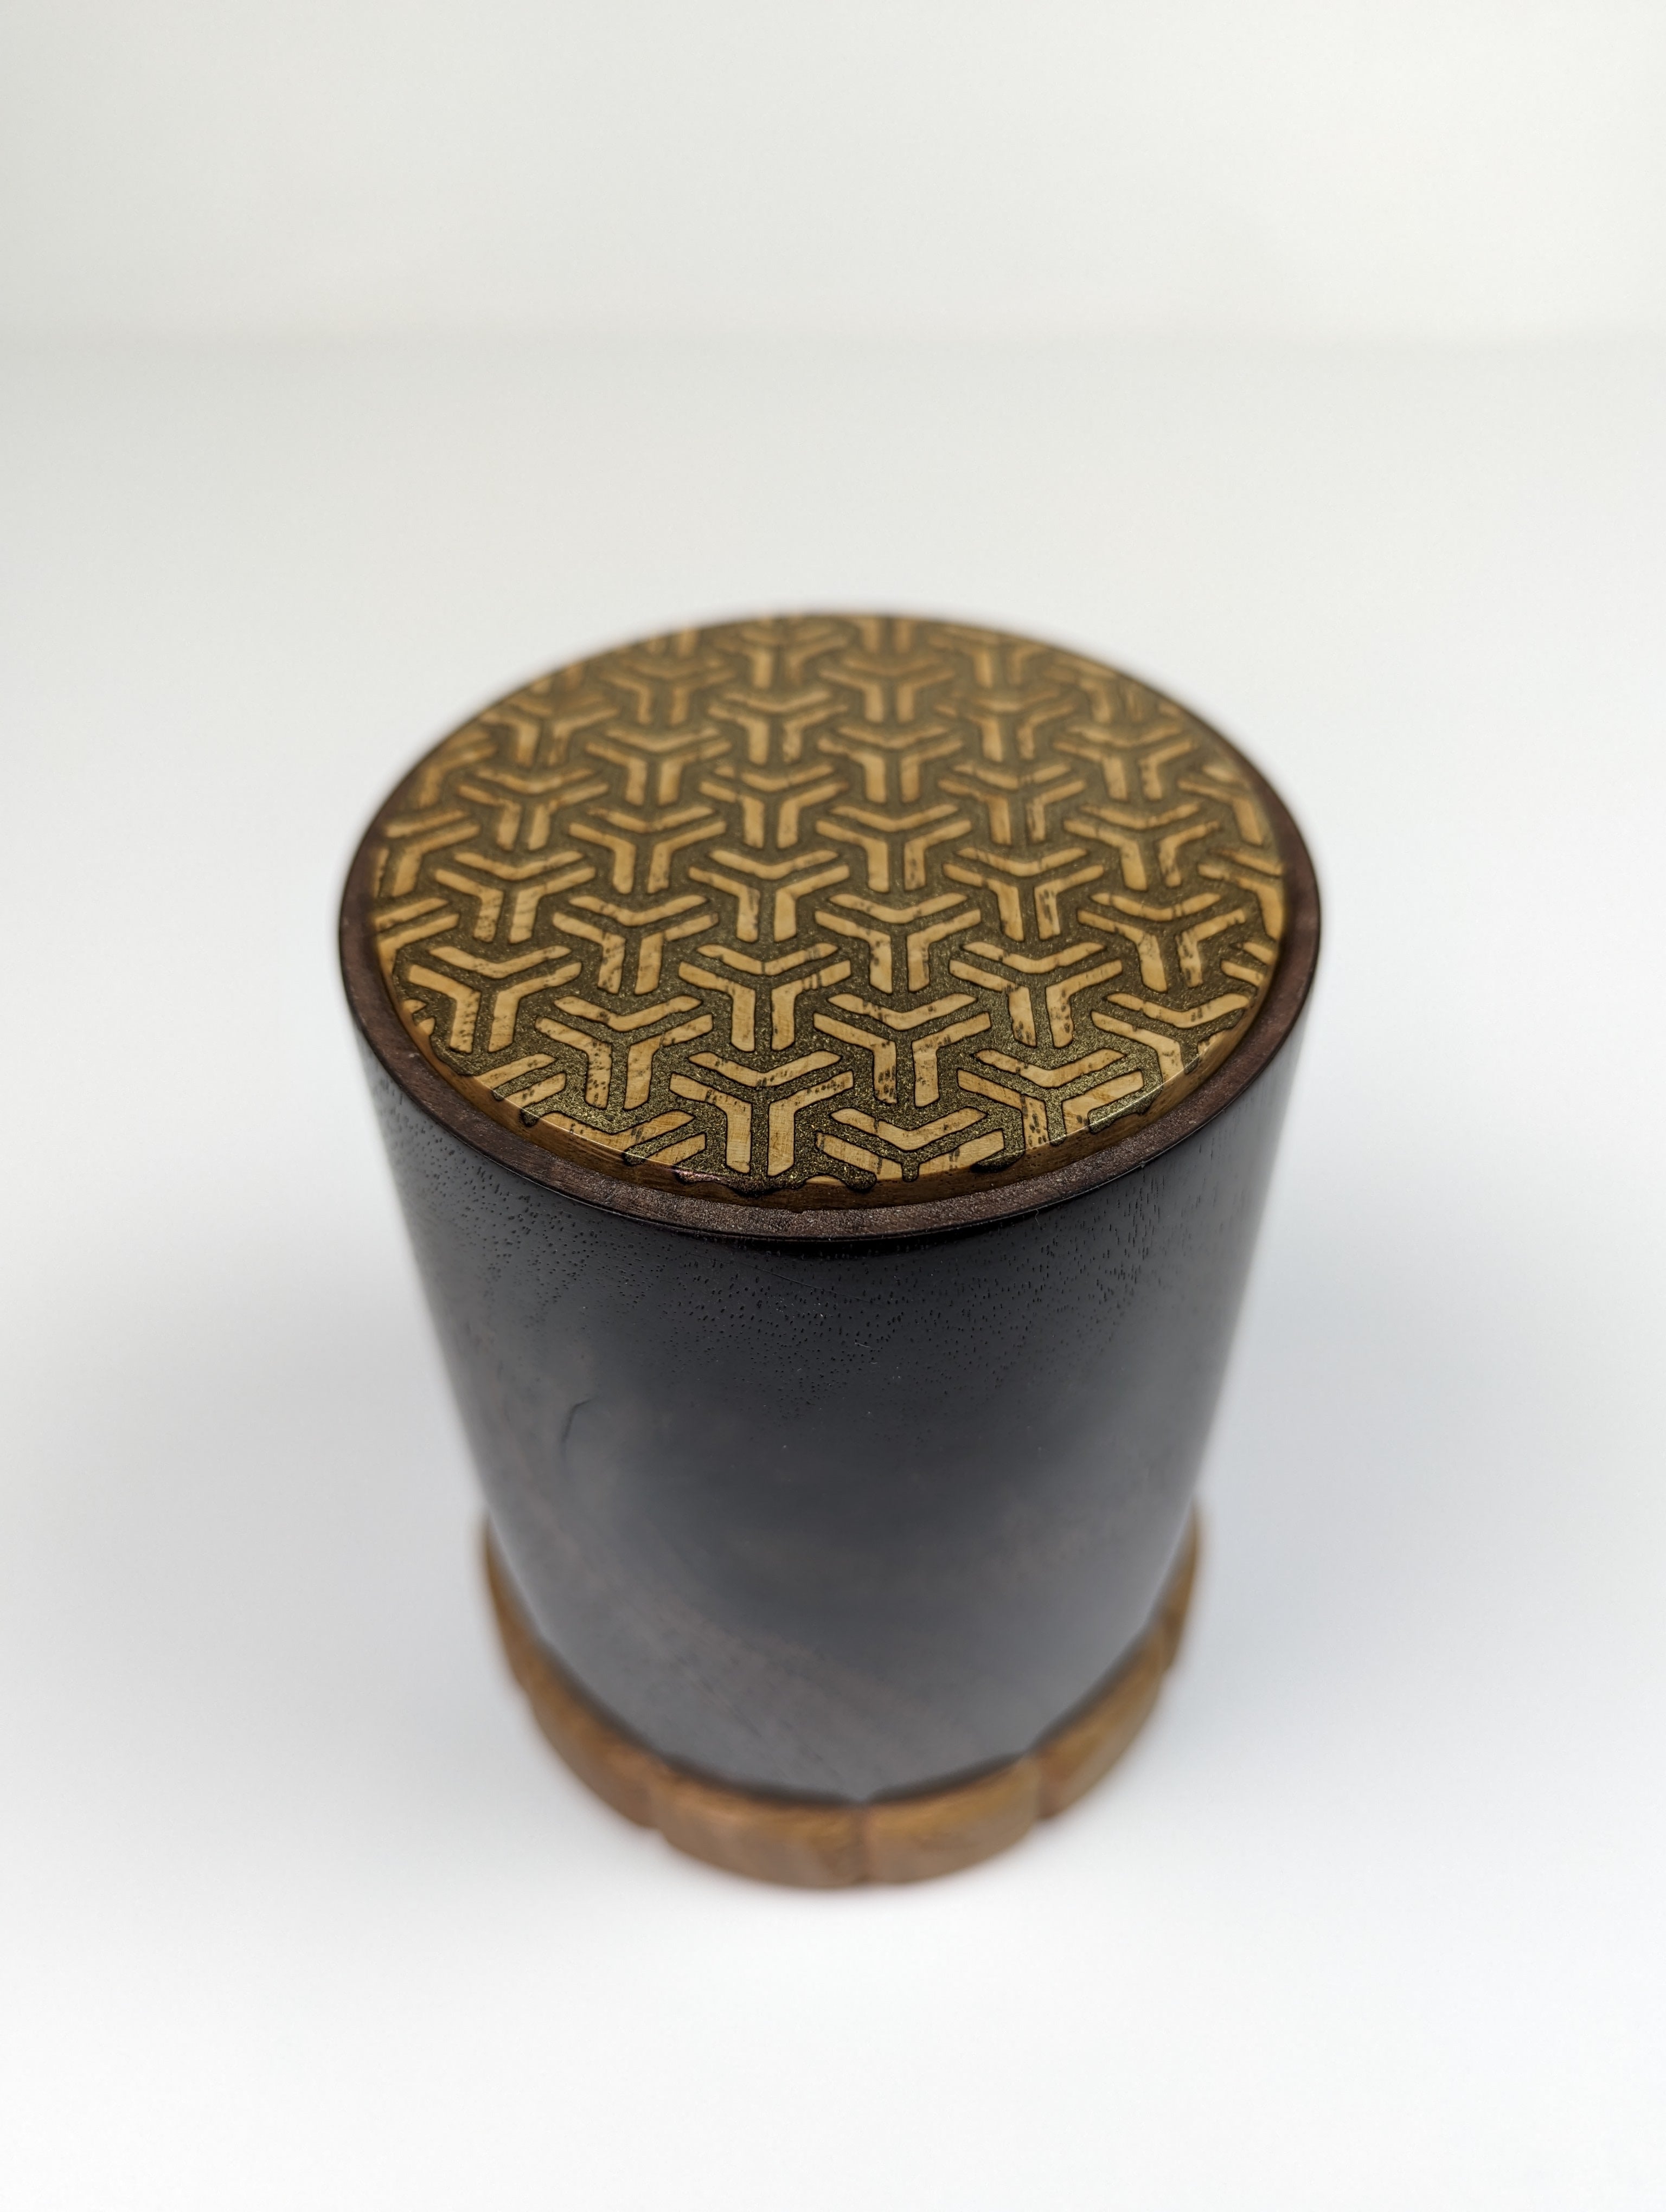 Top Brass patterned puzzle box